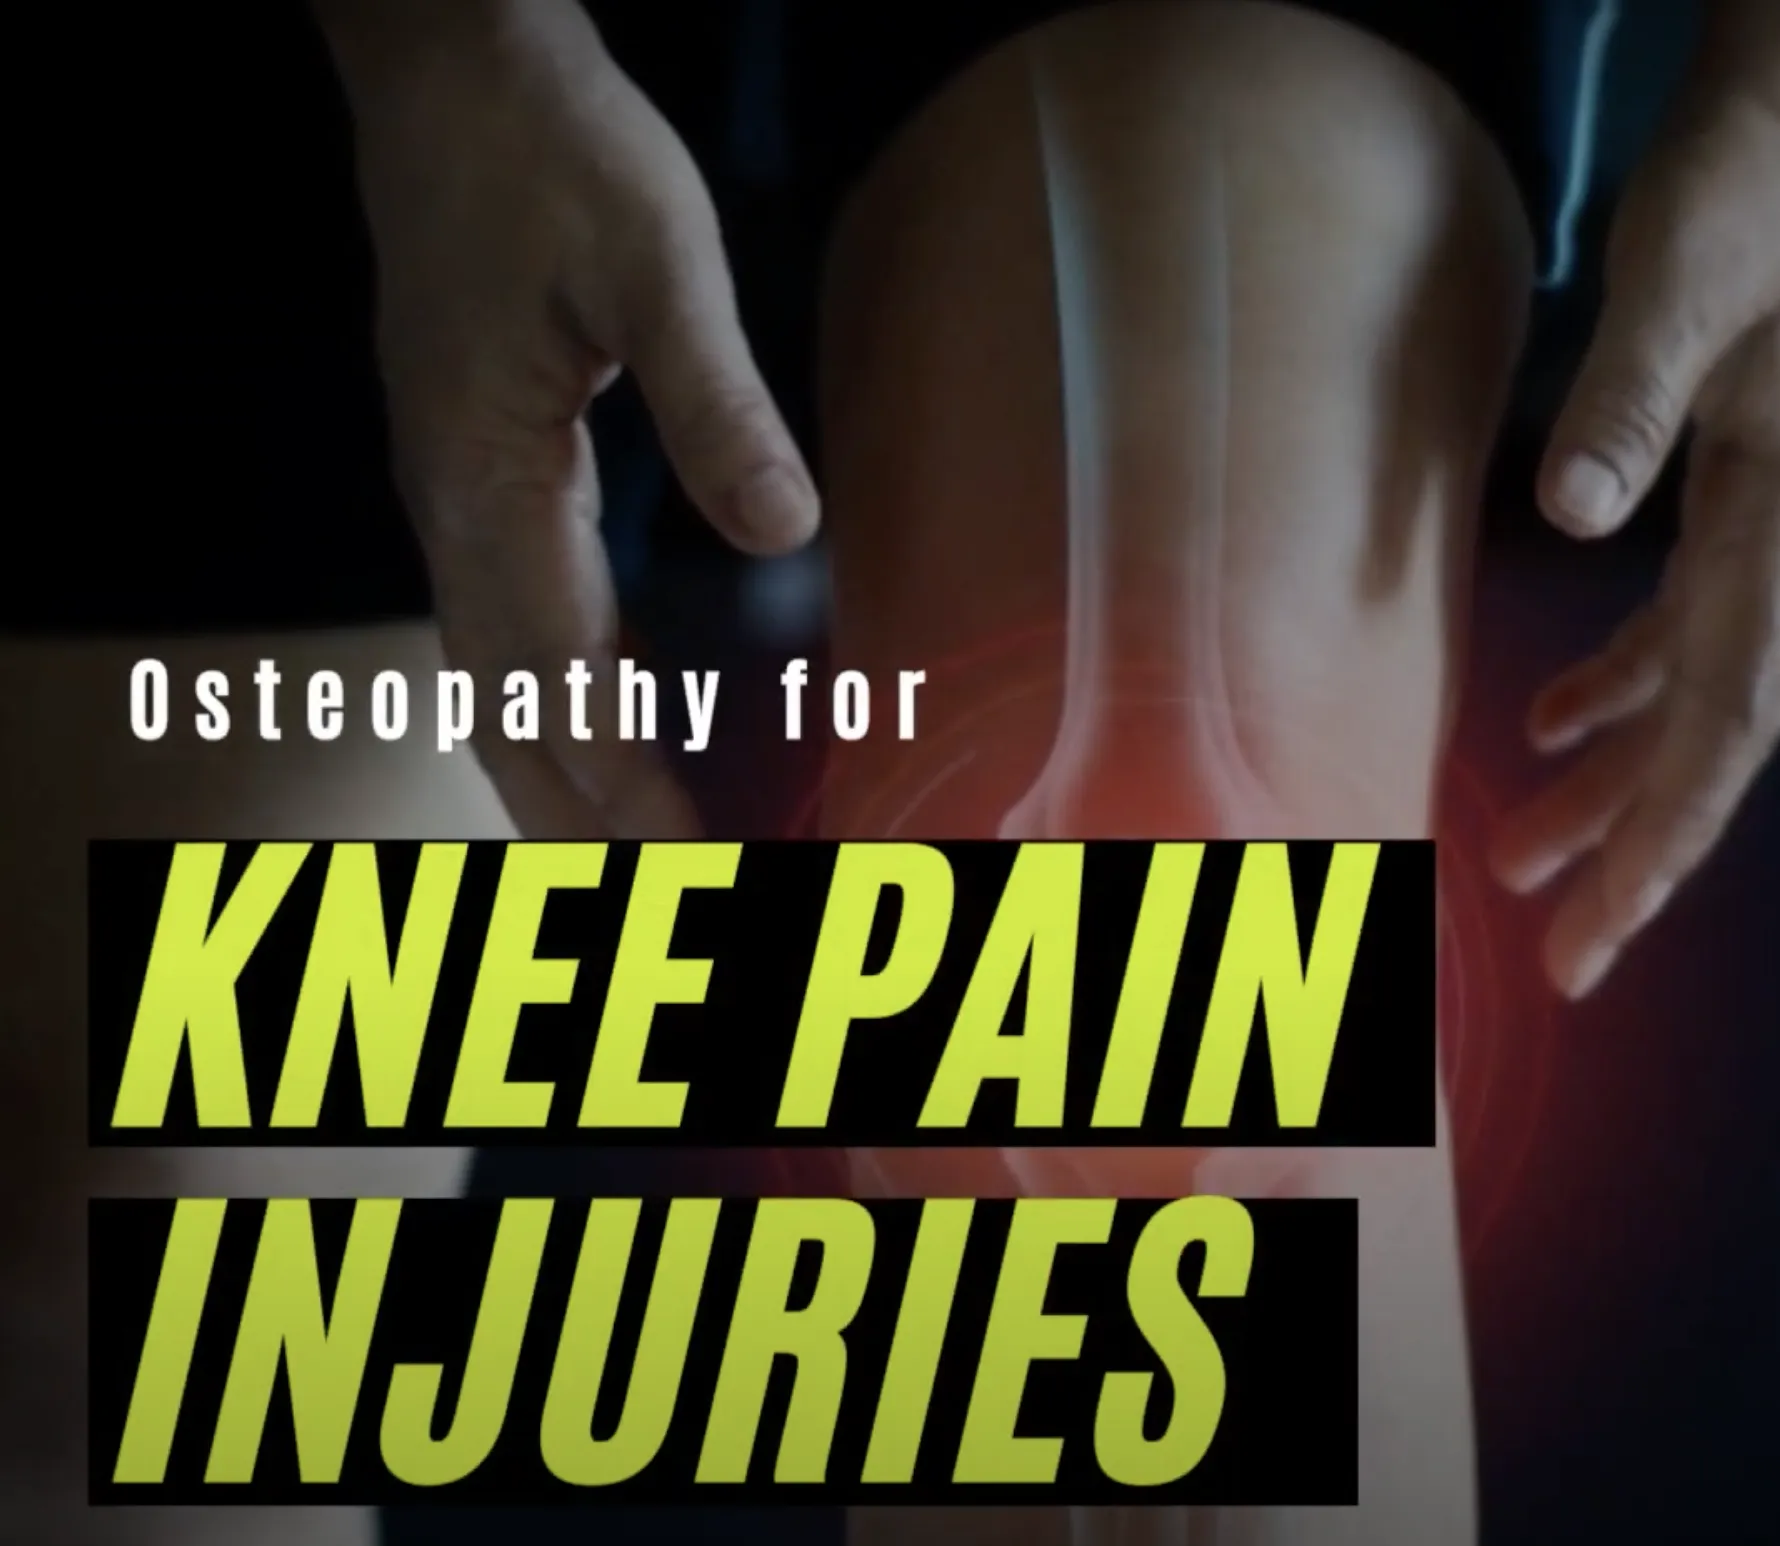 Osteopathy for knee pain injuries